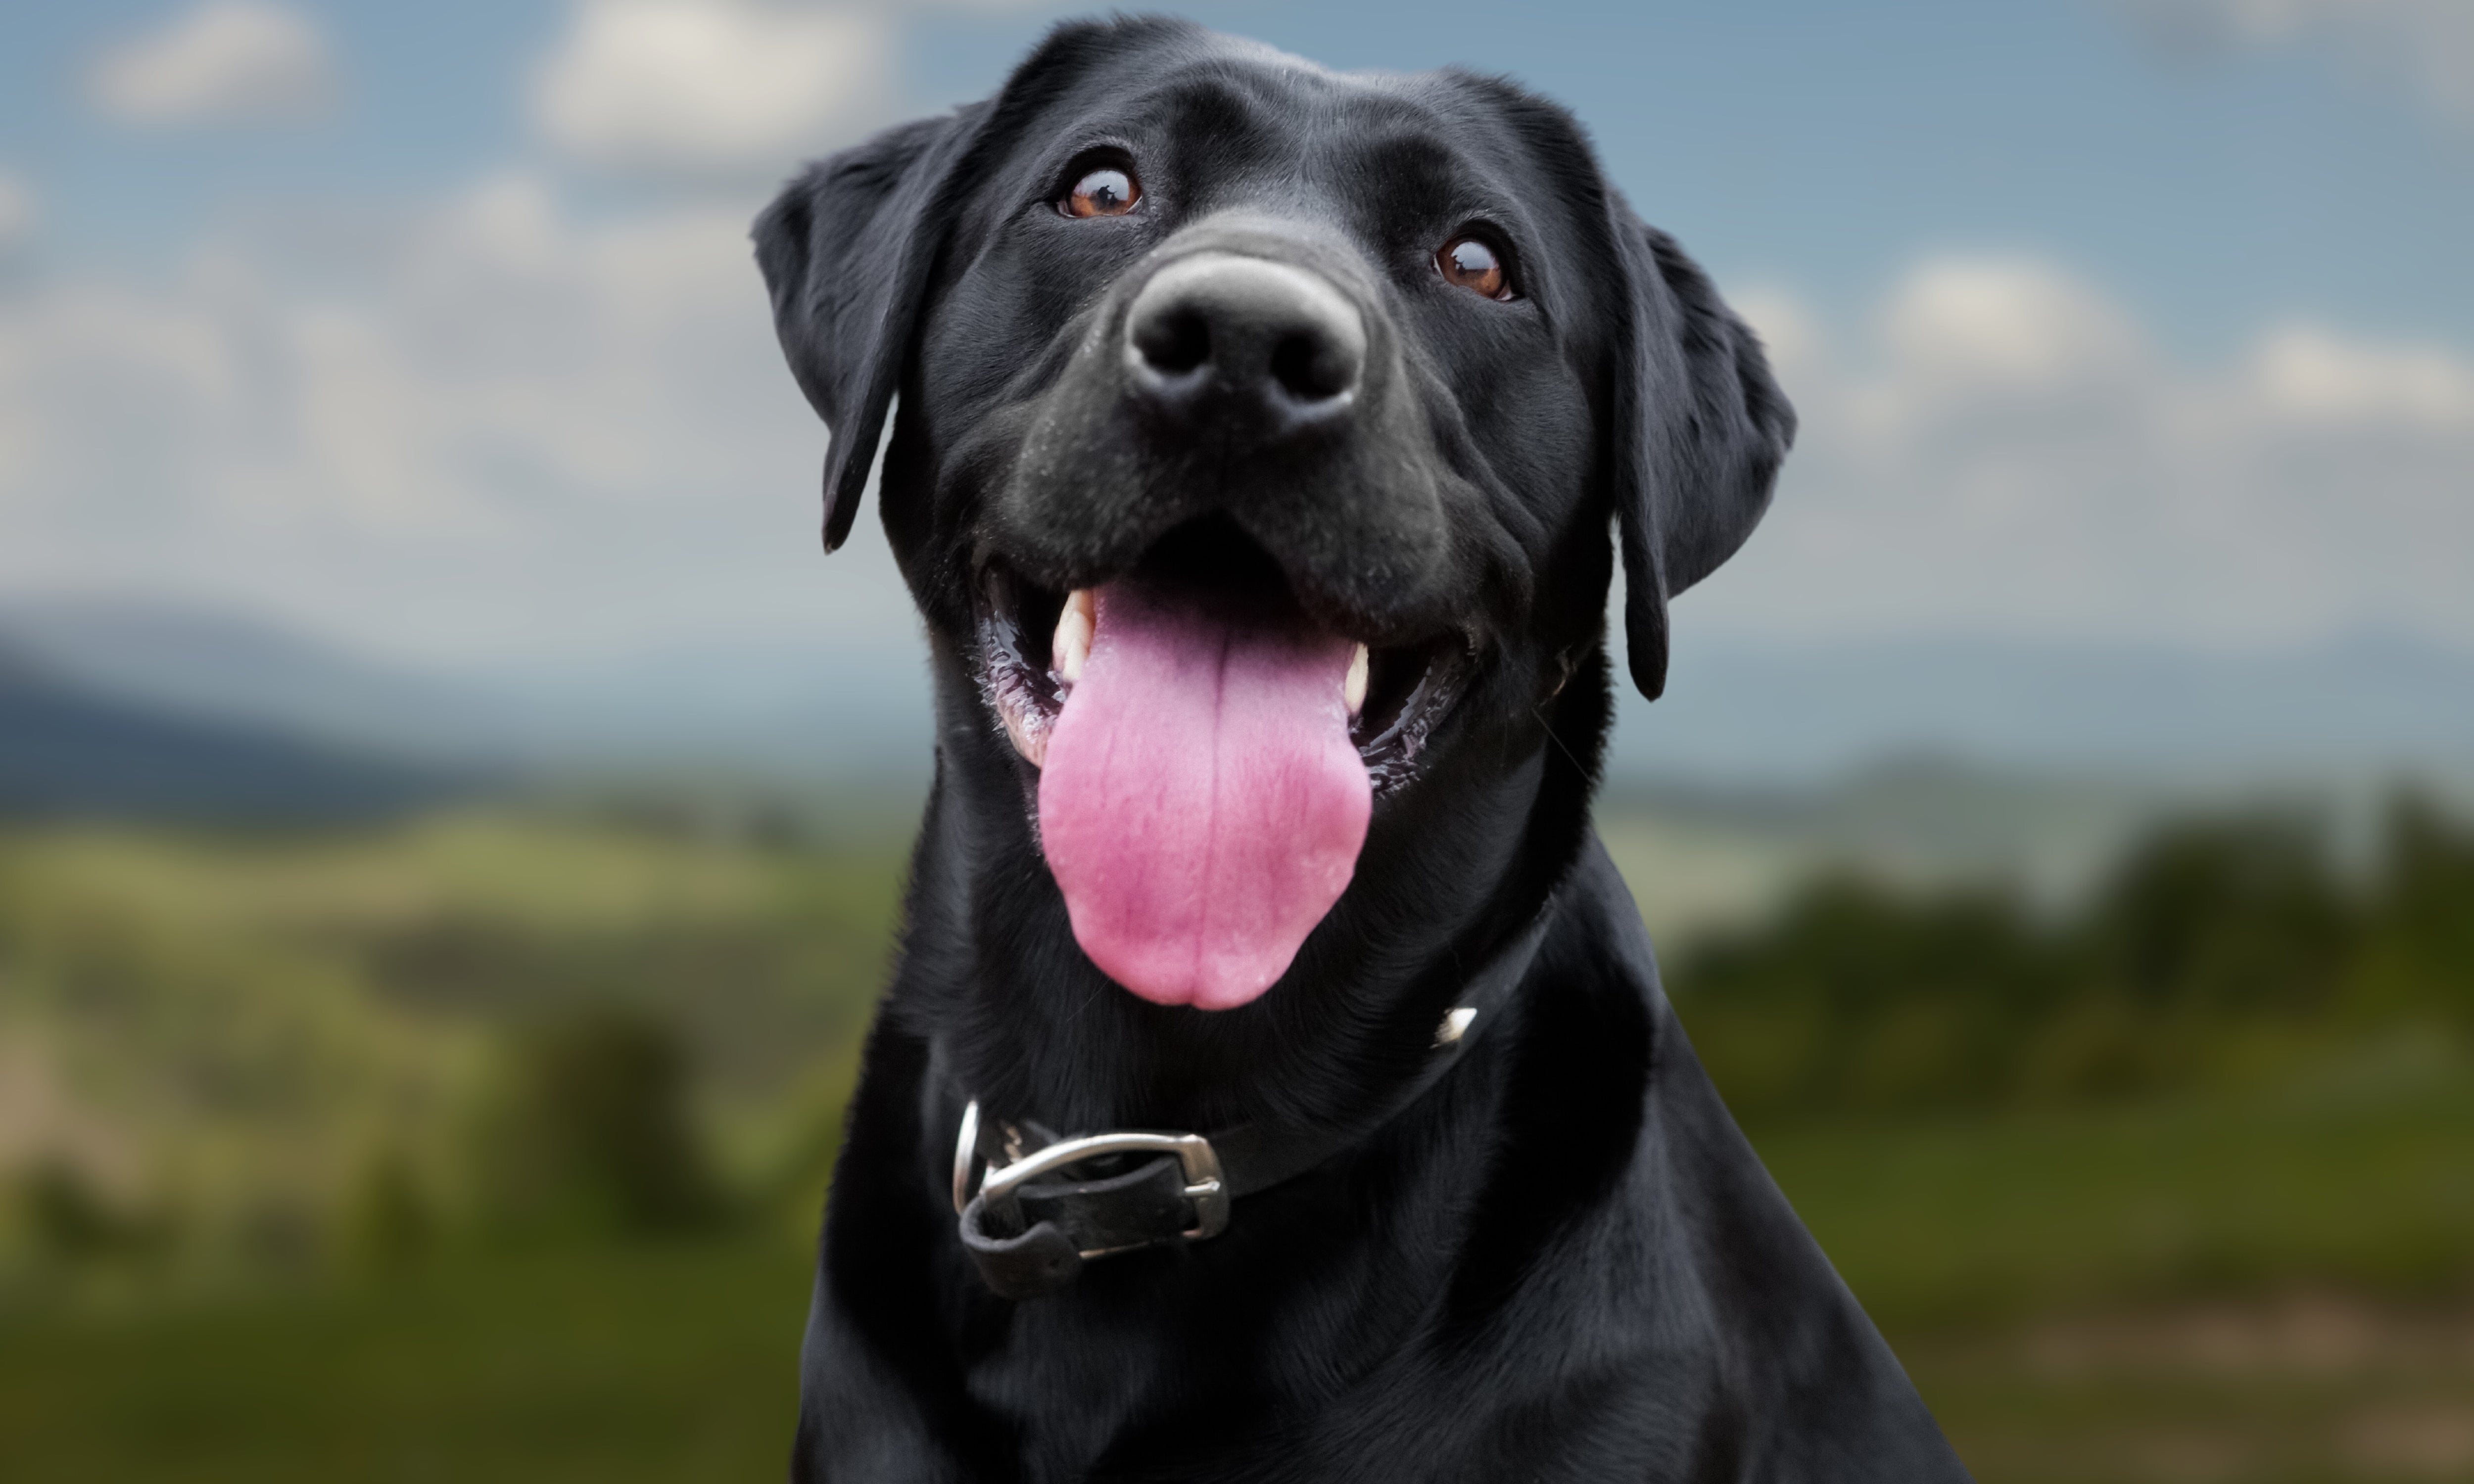 A black Labrador Retriever with a shiny coat, panting with a pink tongue out, against a blurred natural landscape.